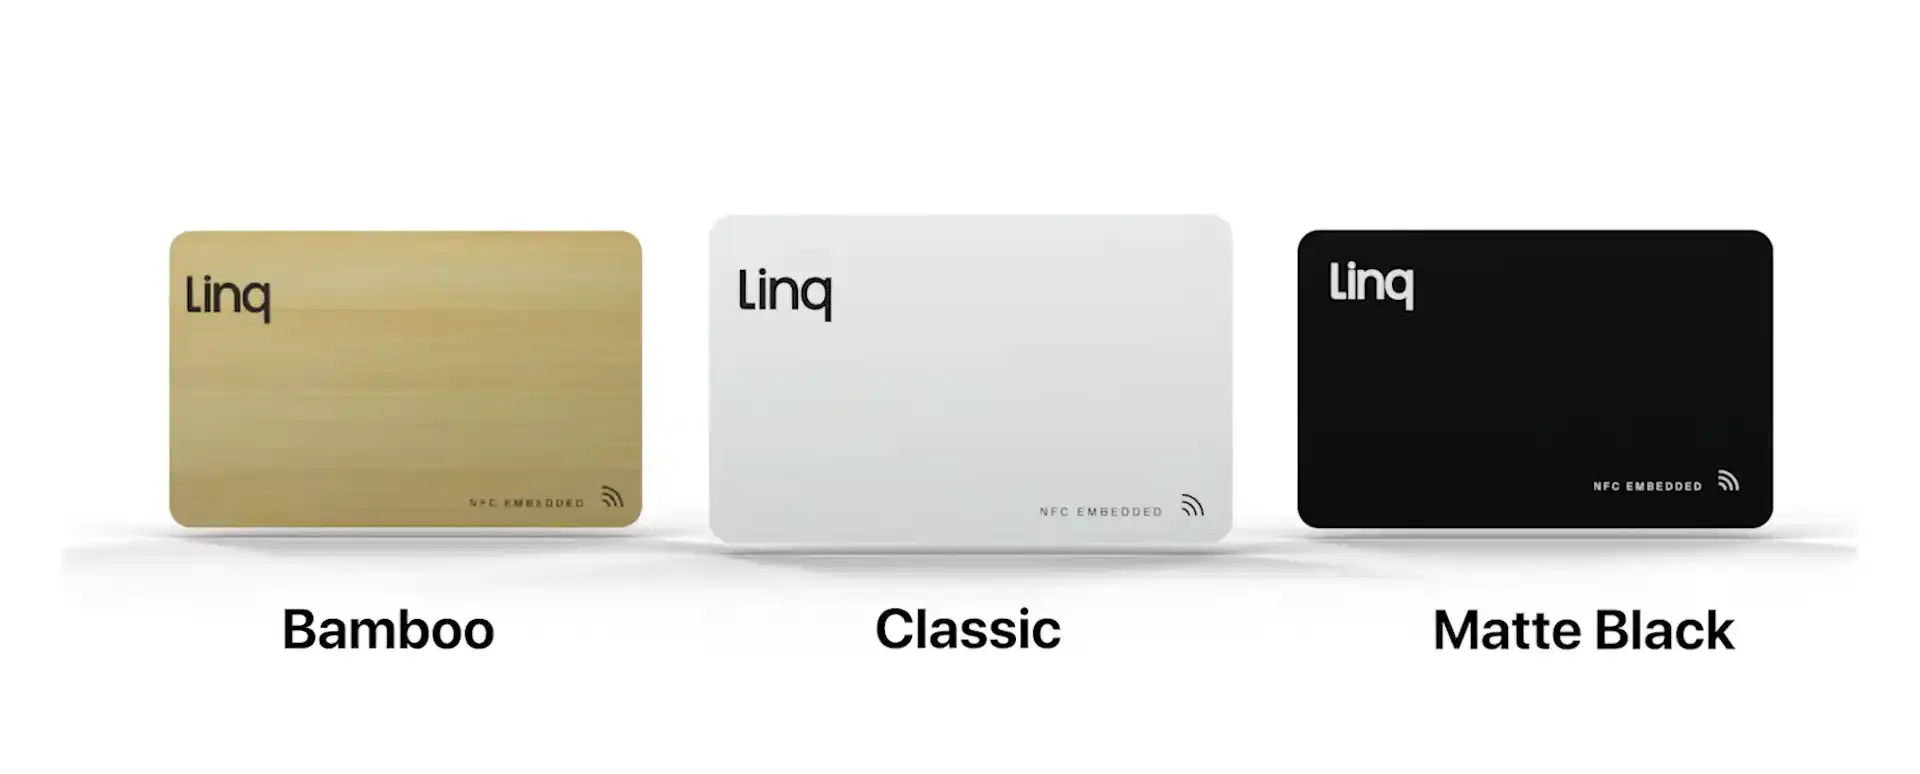 Linq business card